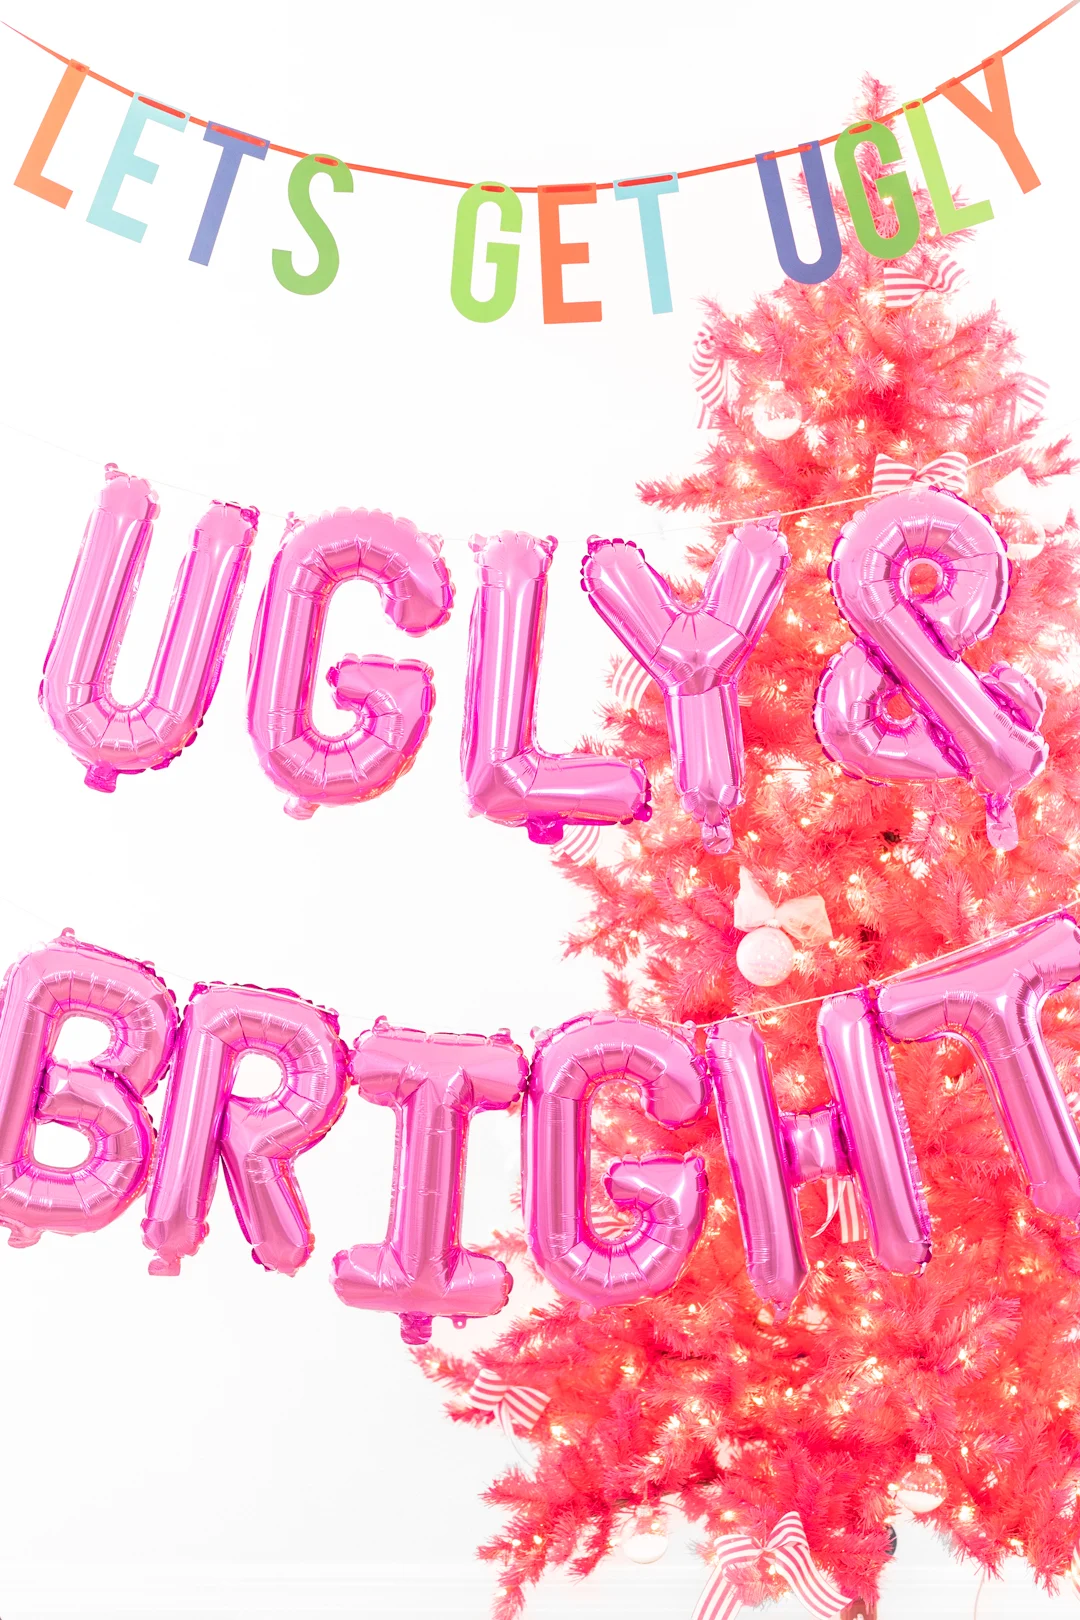 ugly and bright balloons